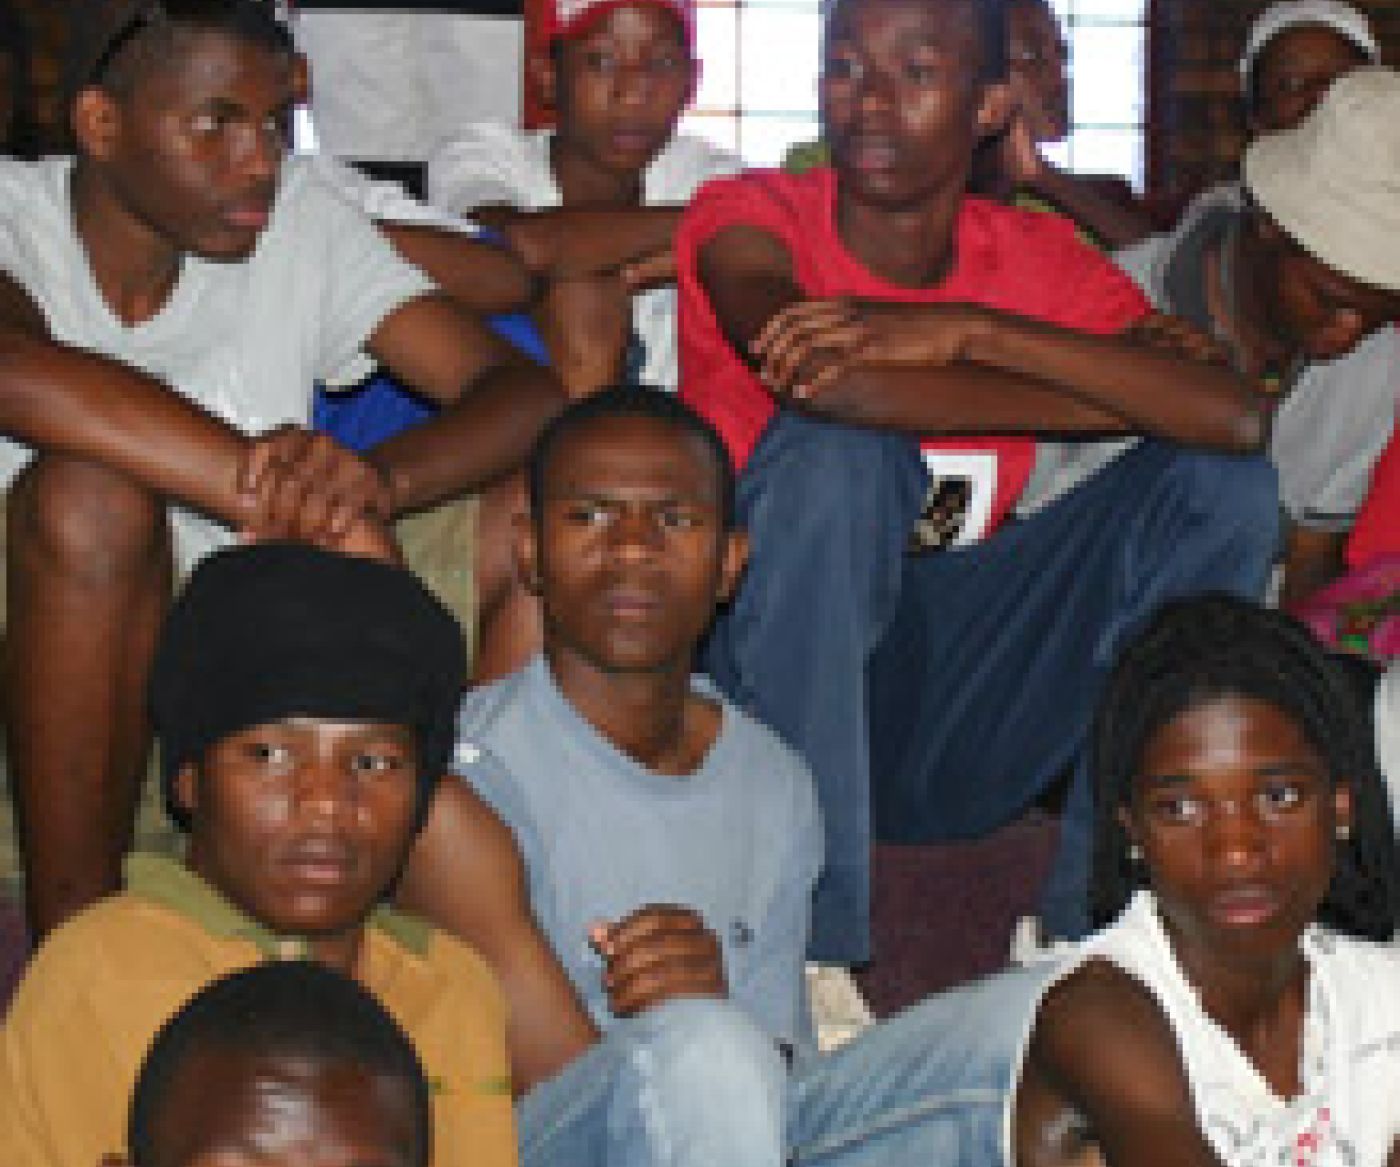 Audience at a dialogue in Middelburg - Dec 2007